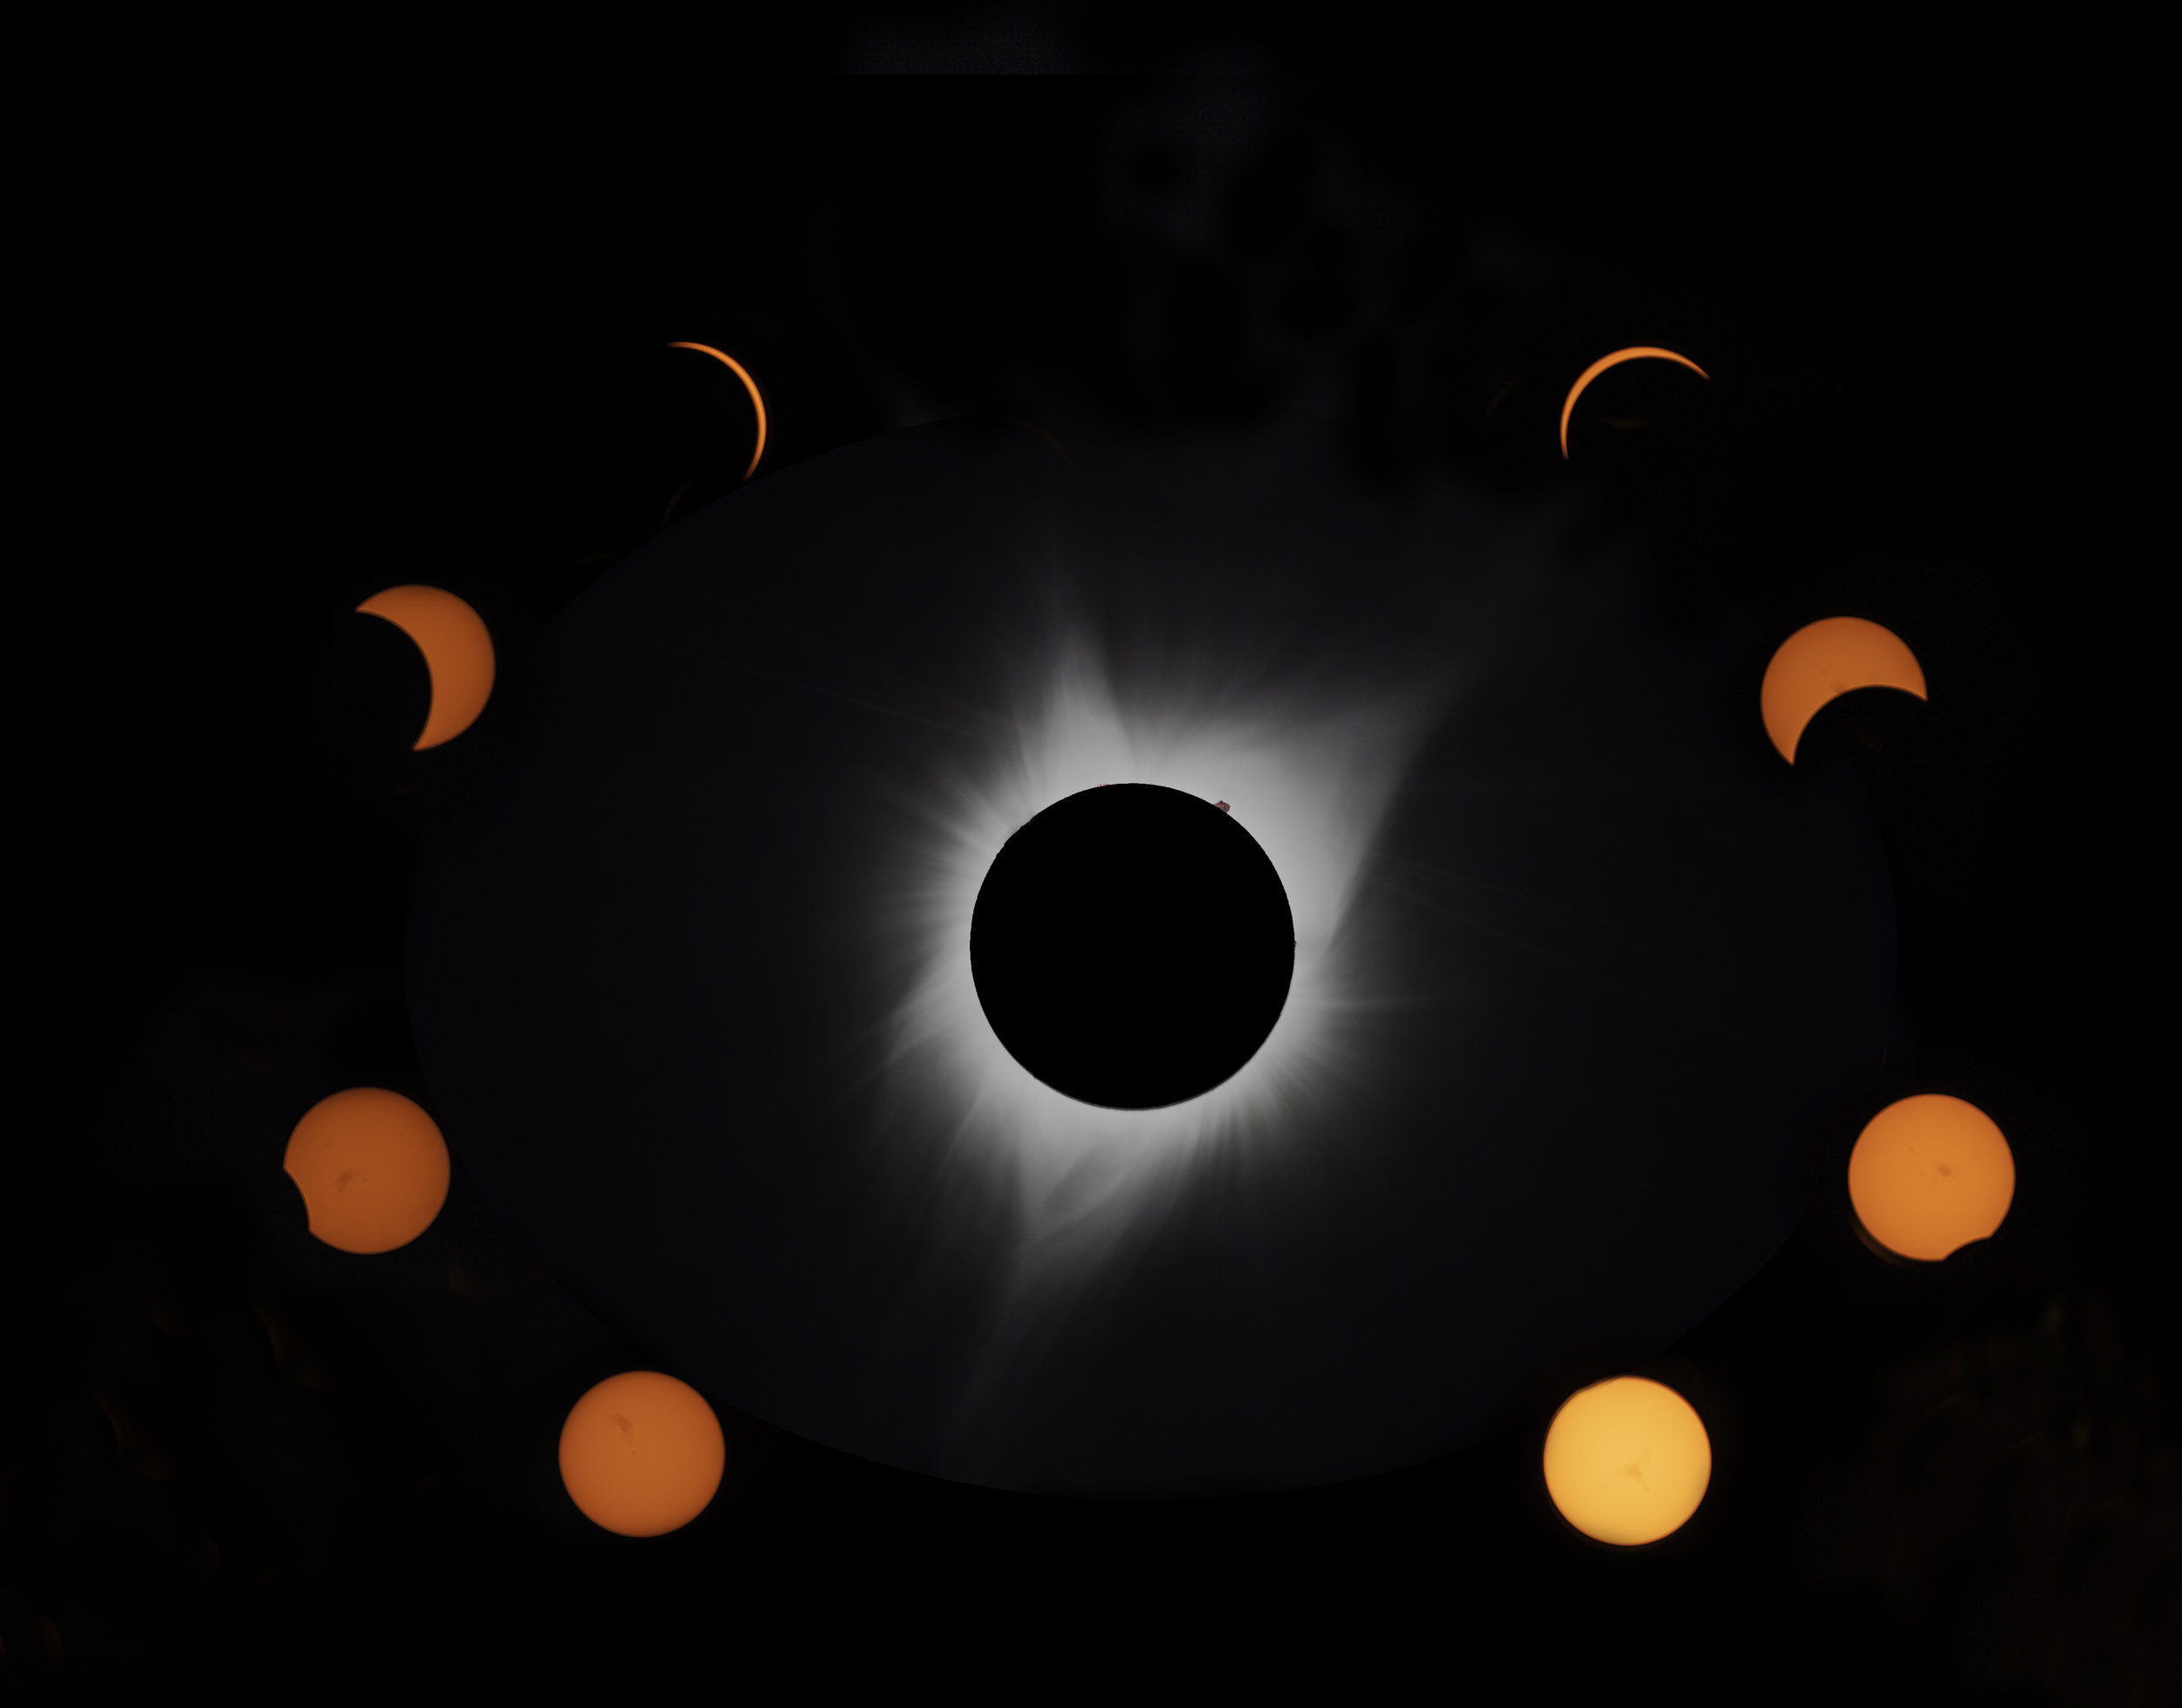   TIME LAPSE OF AUGUST SOLAR ECLIPSE. &nbsp;I PROCESSED THIS PHOTO AND TOOK THE PHOTO IN THE CENTER.&nbsp;THE VARIOUS PHASES OF THE SUN AND MOON BEFORE AND AFTER TOTALITY WERE PHOTOGRAPHED BY MY GOOD FRIEND TONY SALVATORE.  